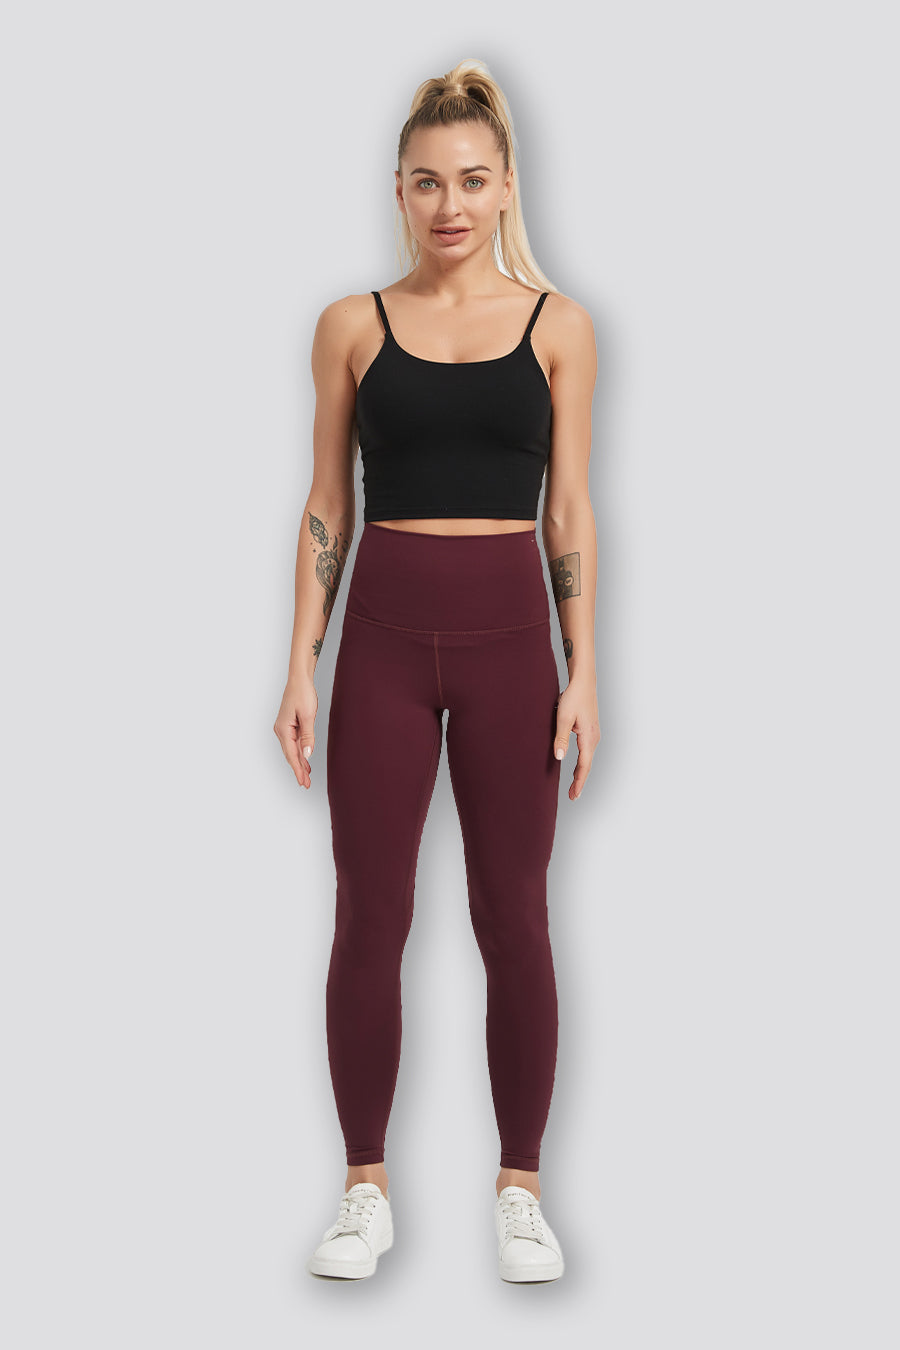  altiland Buttery Soft High Waisted Yoga Pants for